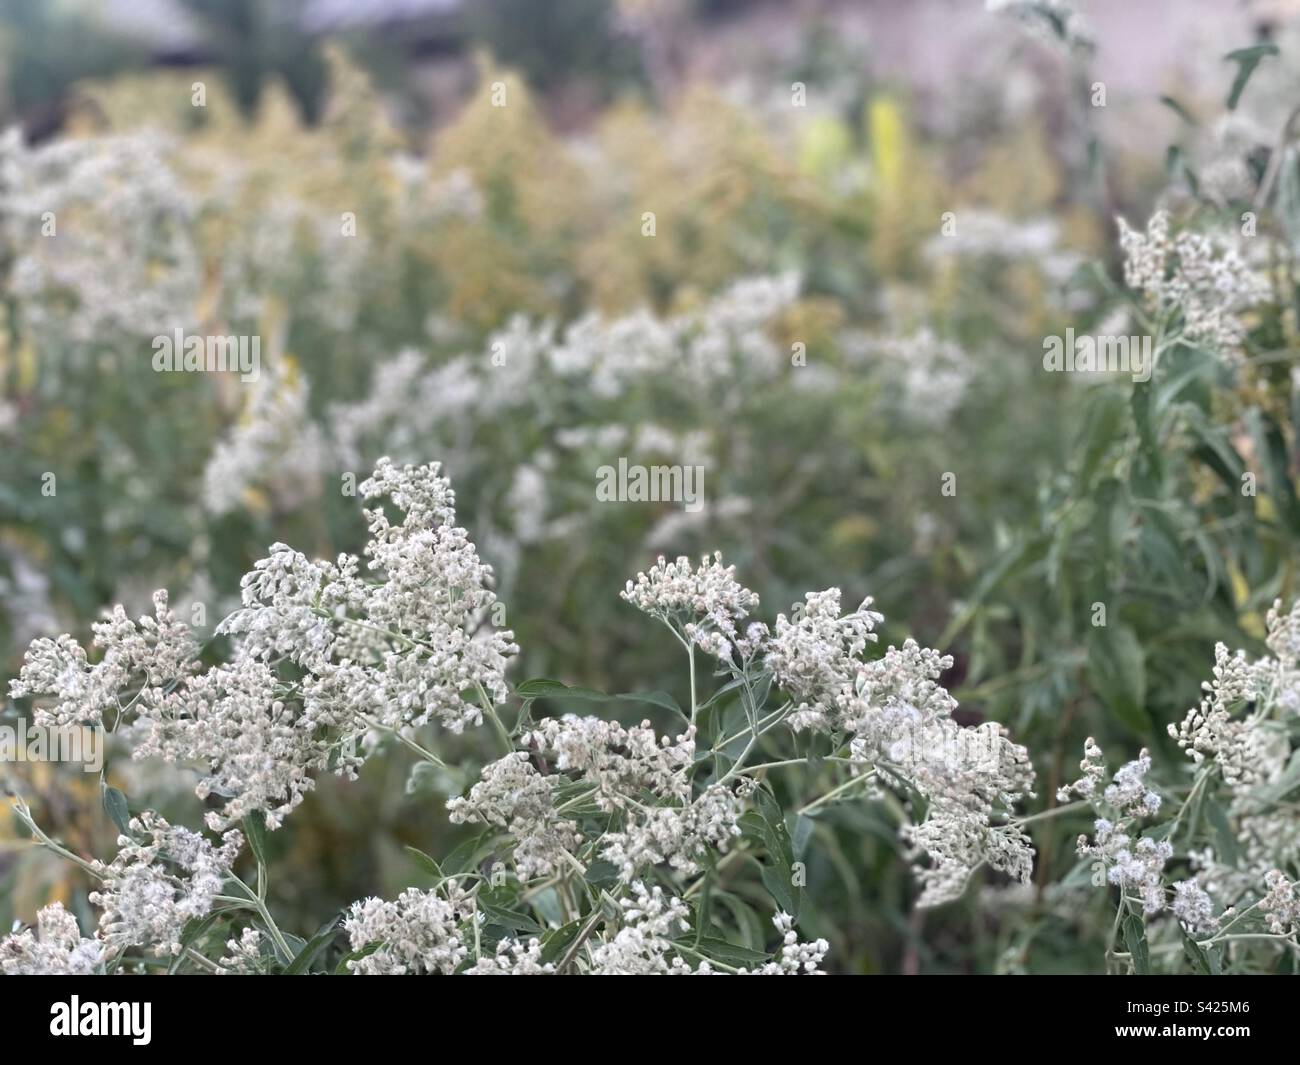 Wild native flowers living in a landscape designed for sustainability. Stock Photo